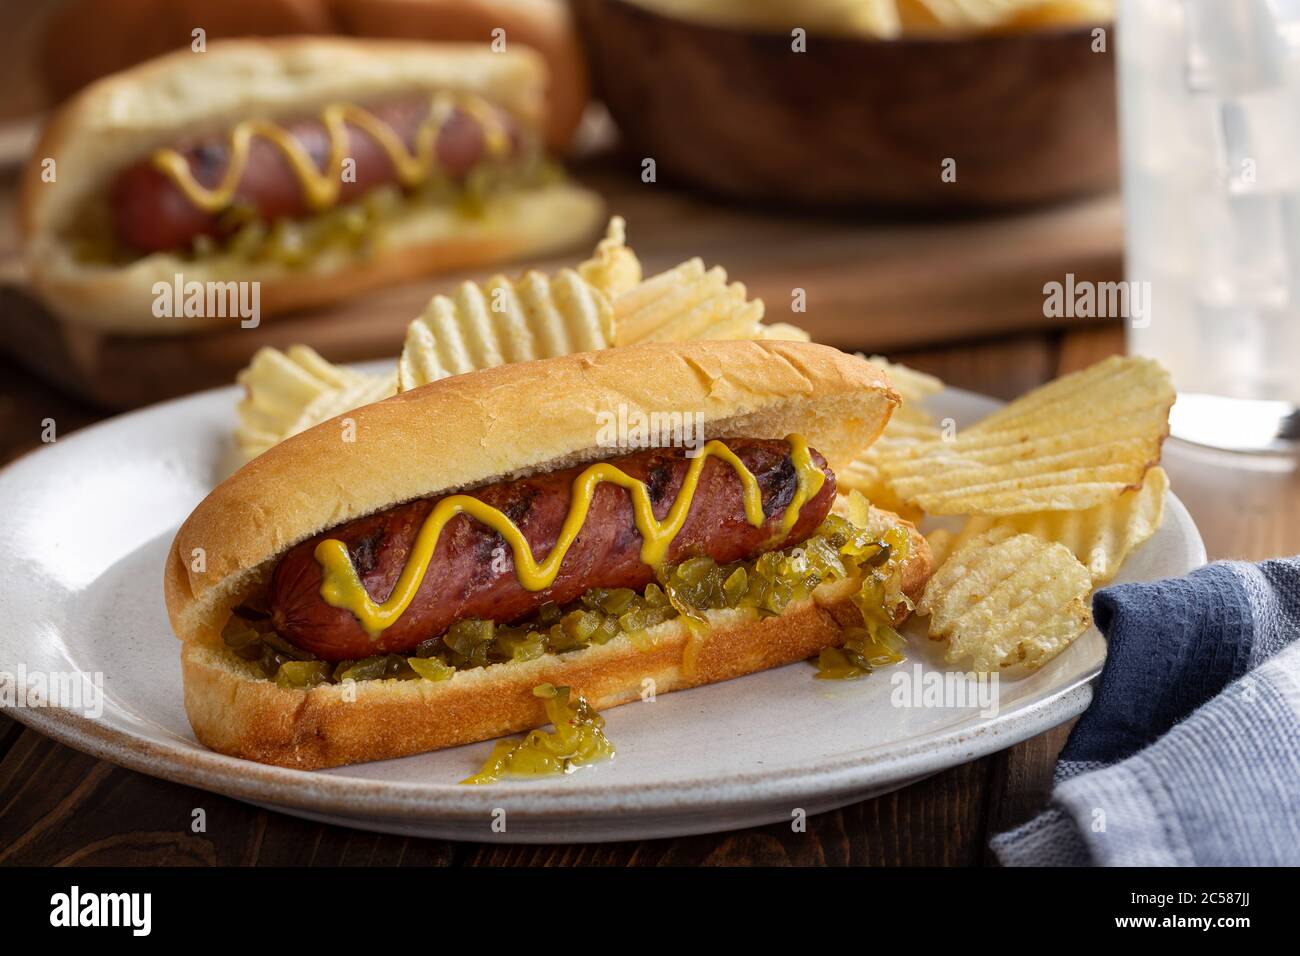 Grilled hot dog with mustard and relish on a bun and potato chips on a white plate Stock Photo